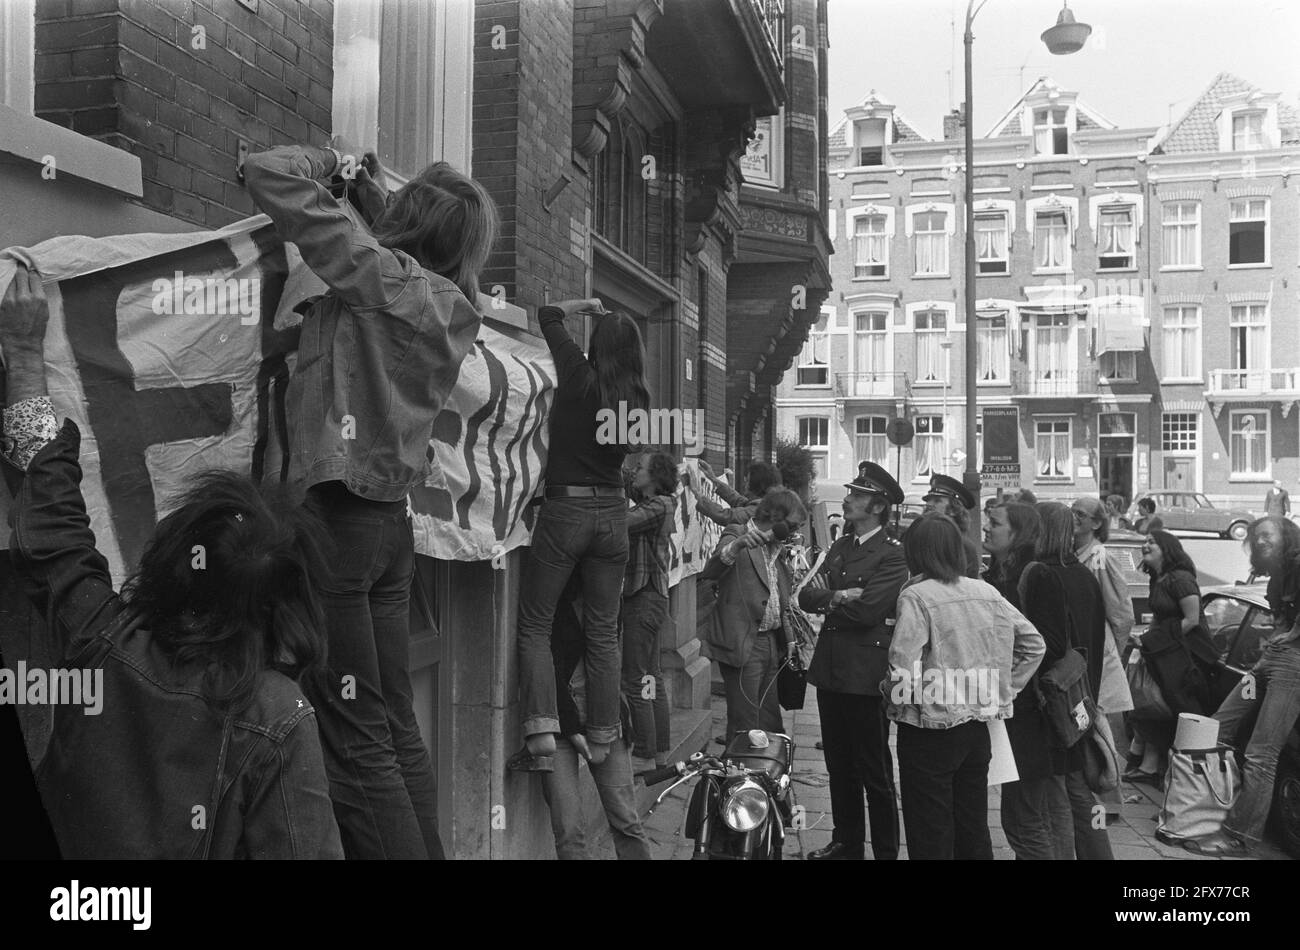 Action group tries to occupy PvdA party office in Amsterdam in connection with recognition of Guinea Bissau, banner on wall of building, 28 May 1974, Action groups, occupations, buildings, banners, The Netherlands, 20th century press agency photo, news to remember, documentary, historic photography 1945-1990, visual stories, human history of the Twentieth Century, capturing moments in time Stock Photo